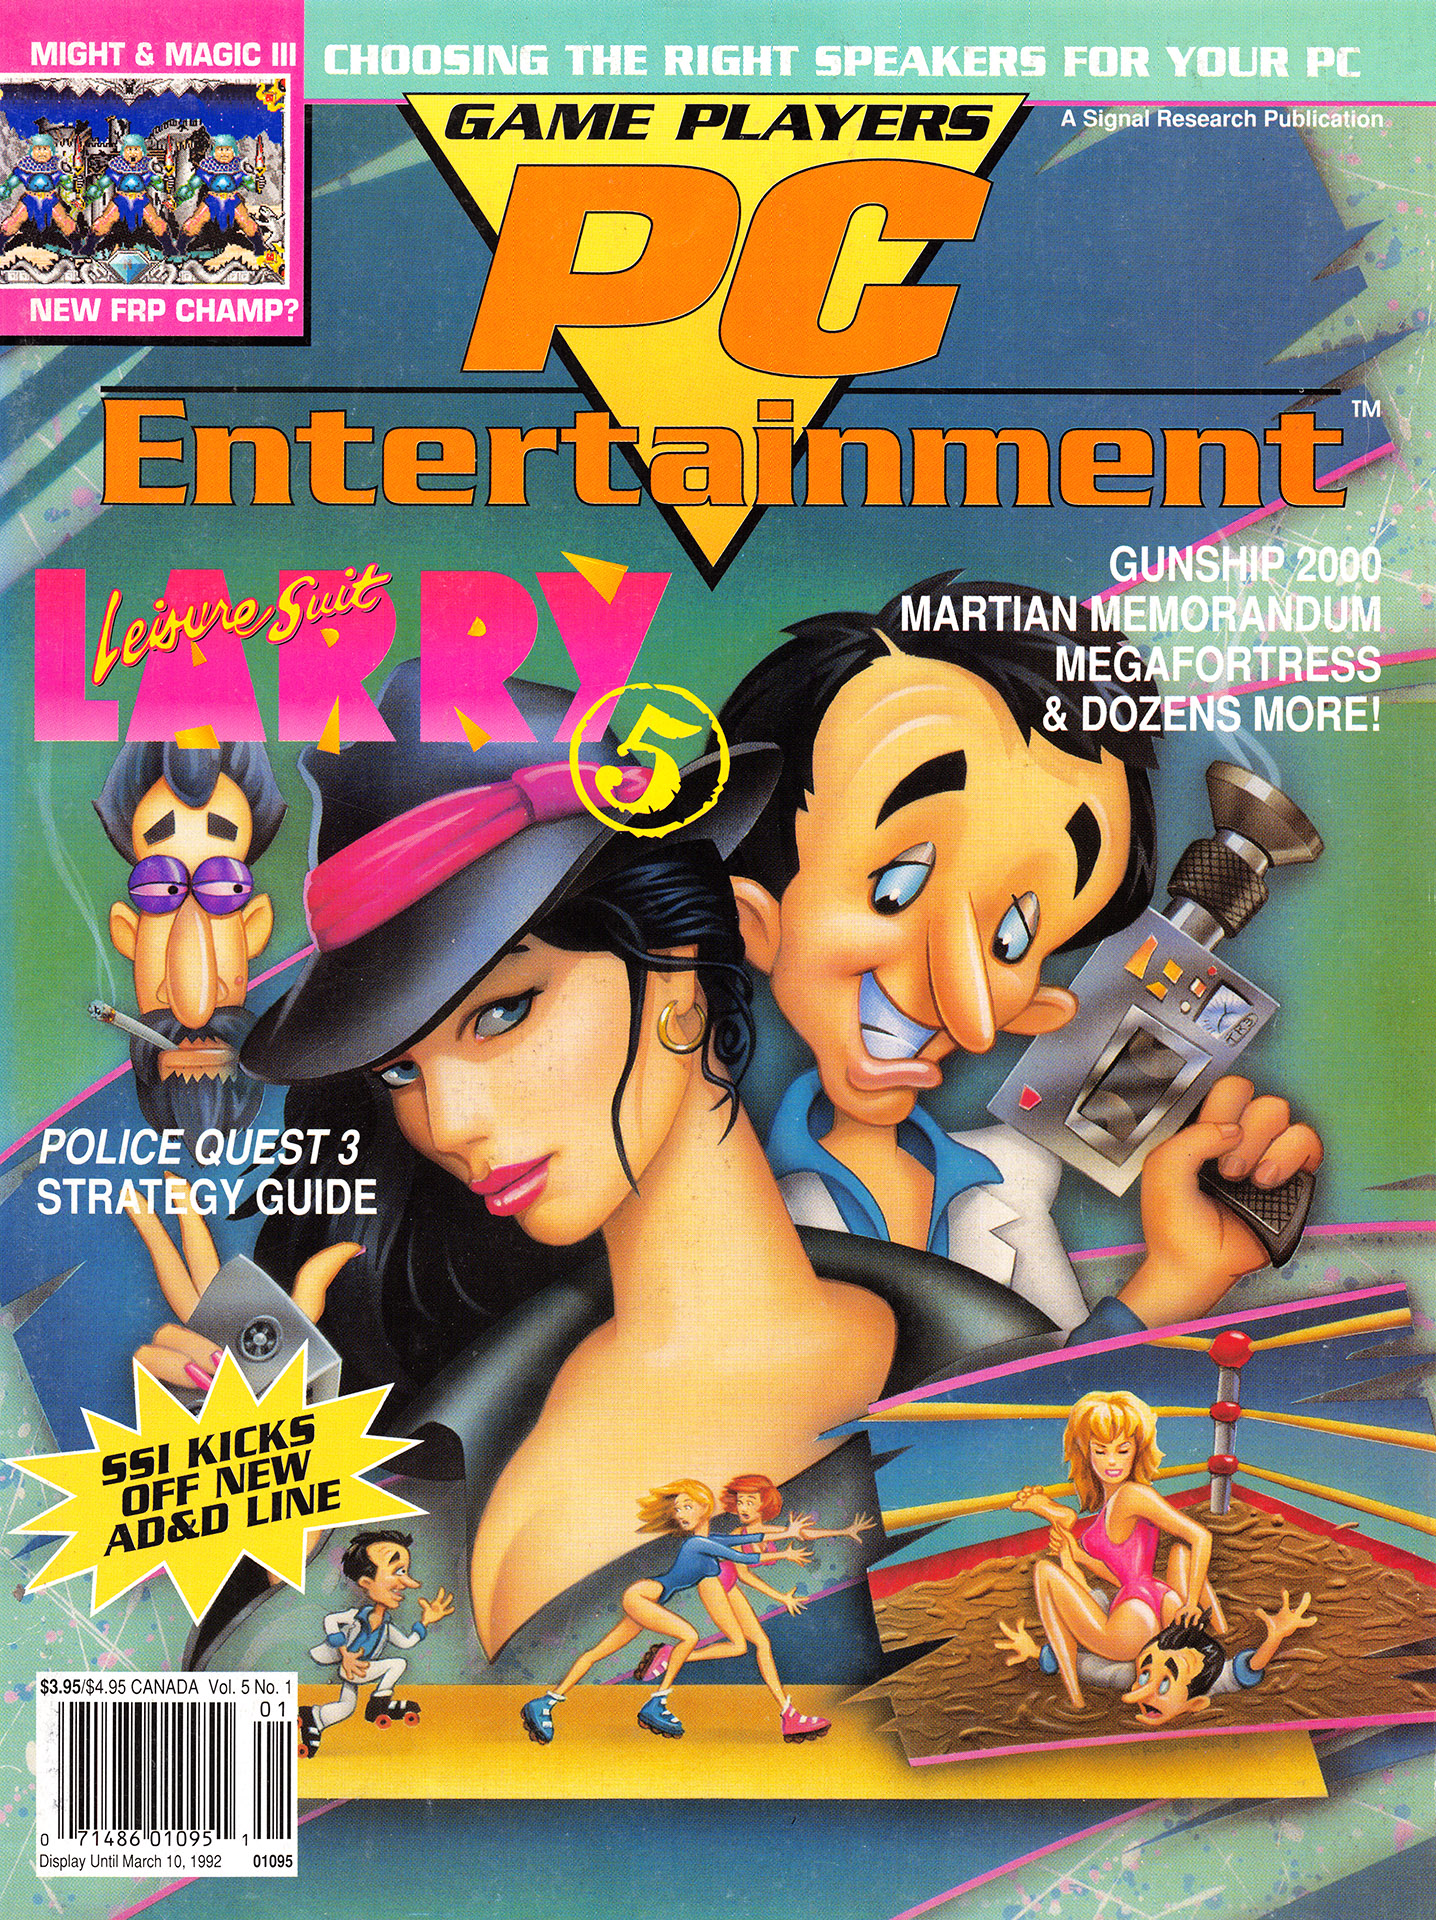 New Release: Game Players PC Entertainment Vol.5 No.1 (Janauary/February 1992)